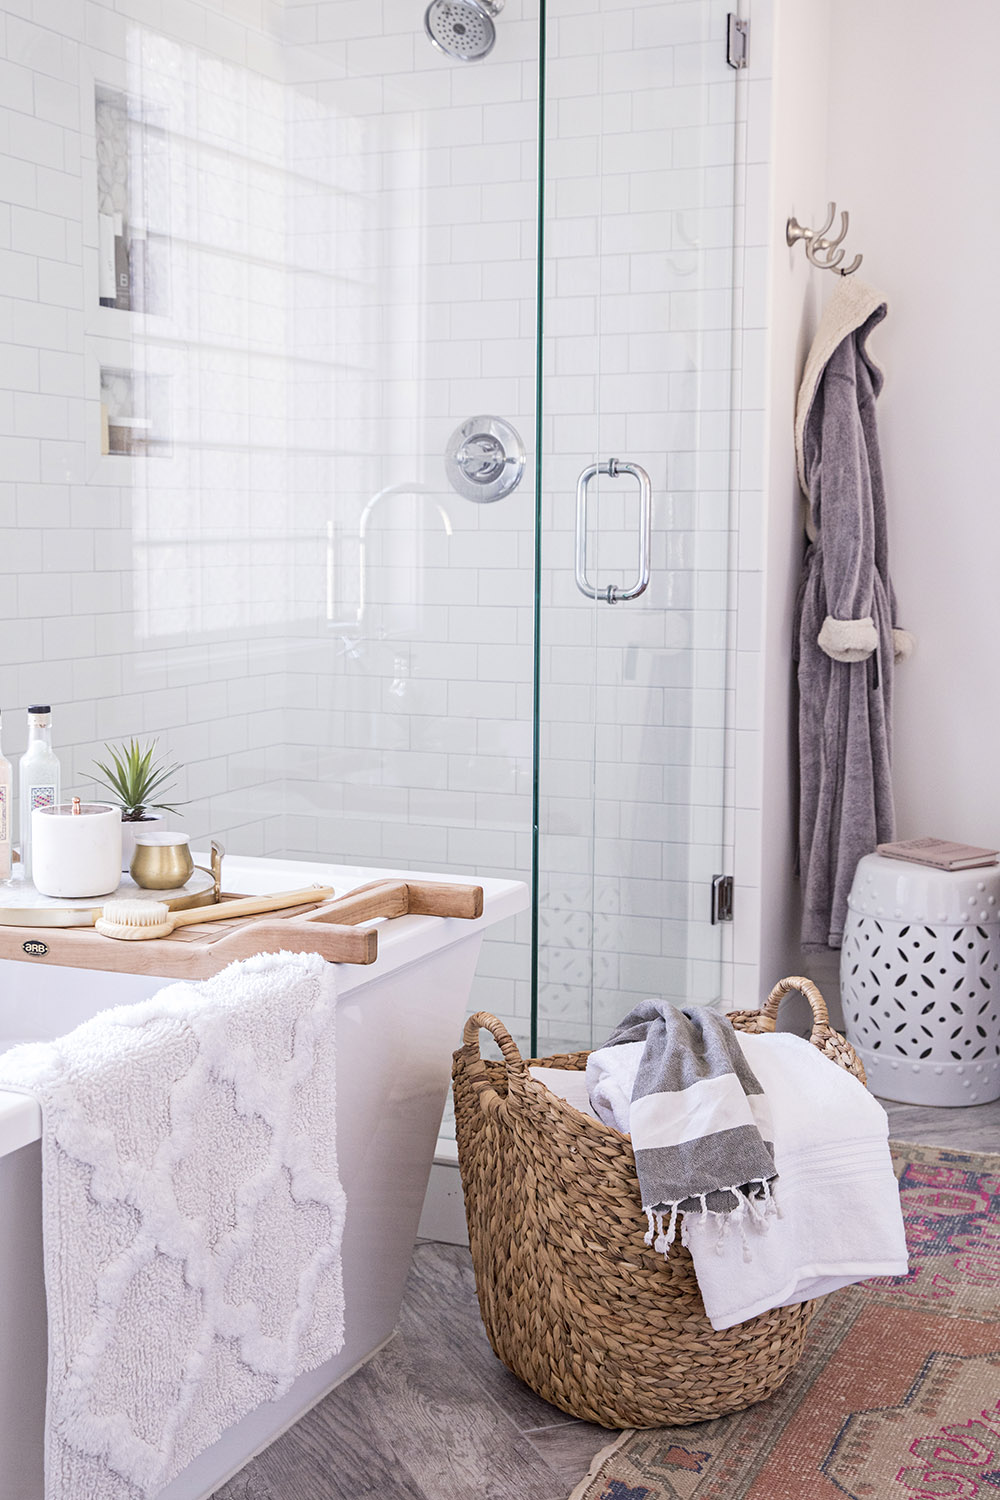 A freestanding bathtub in front of a white tiled shower with glass doors.